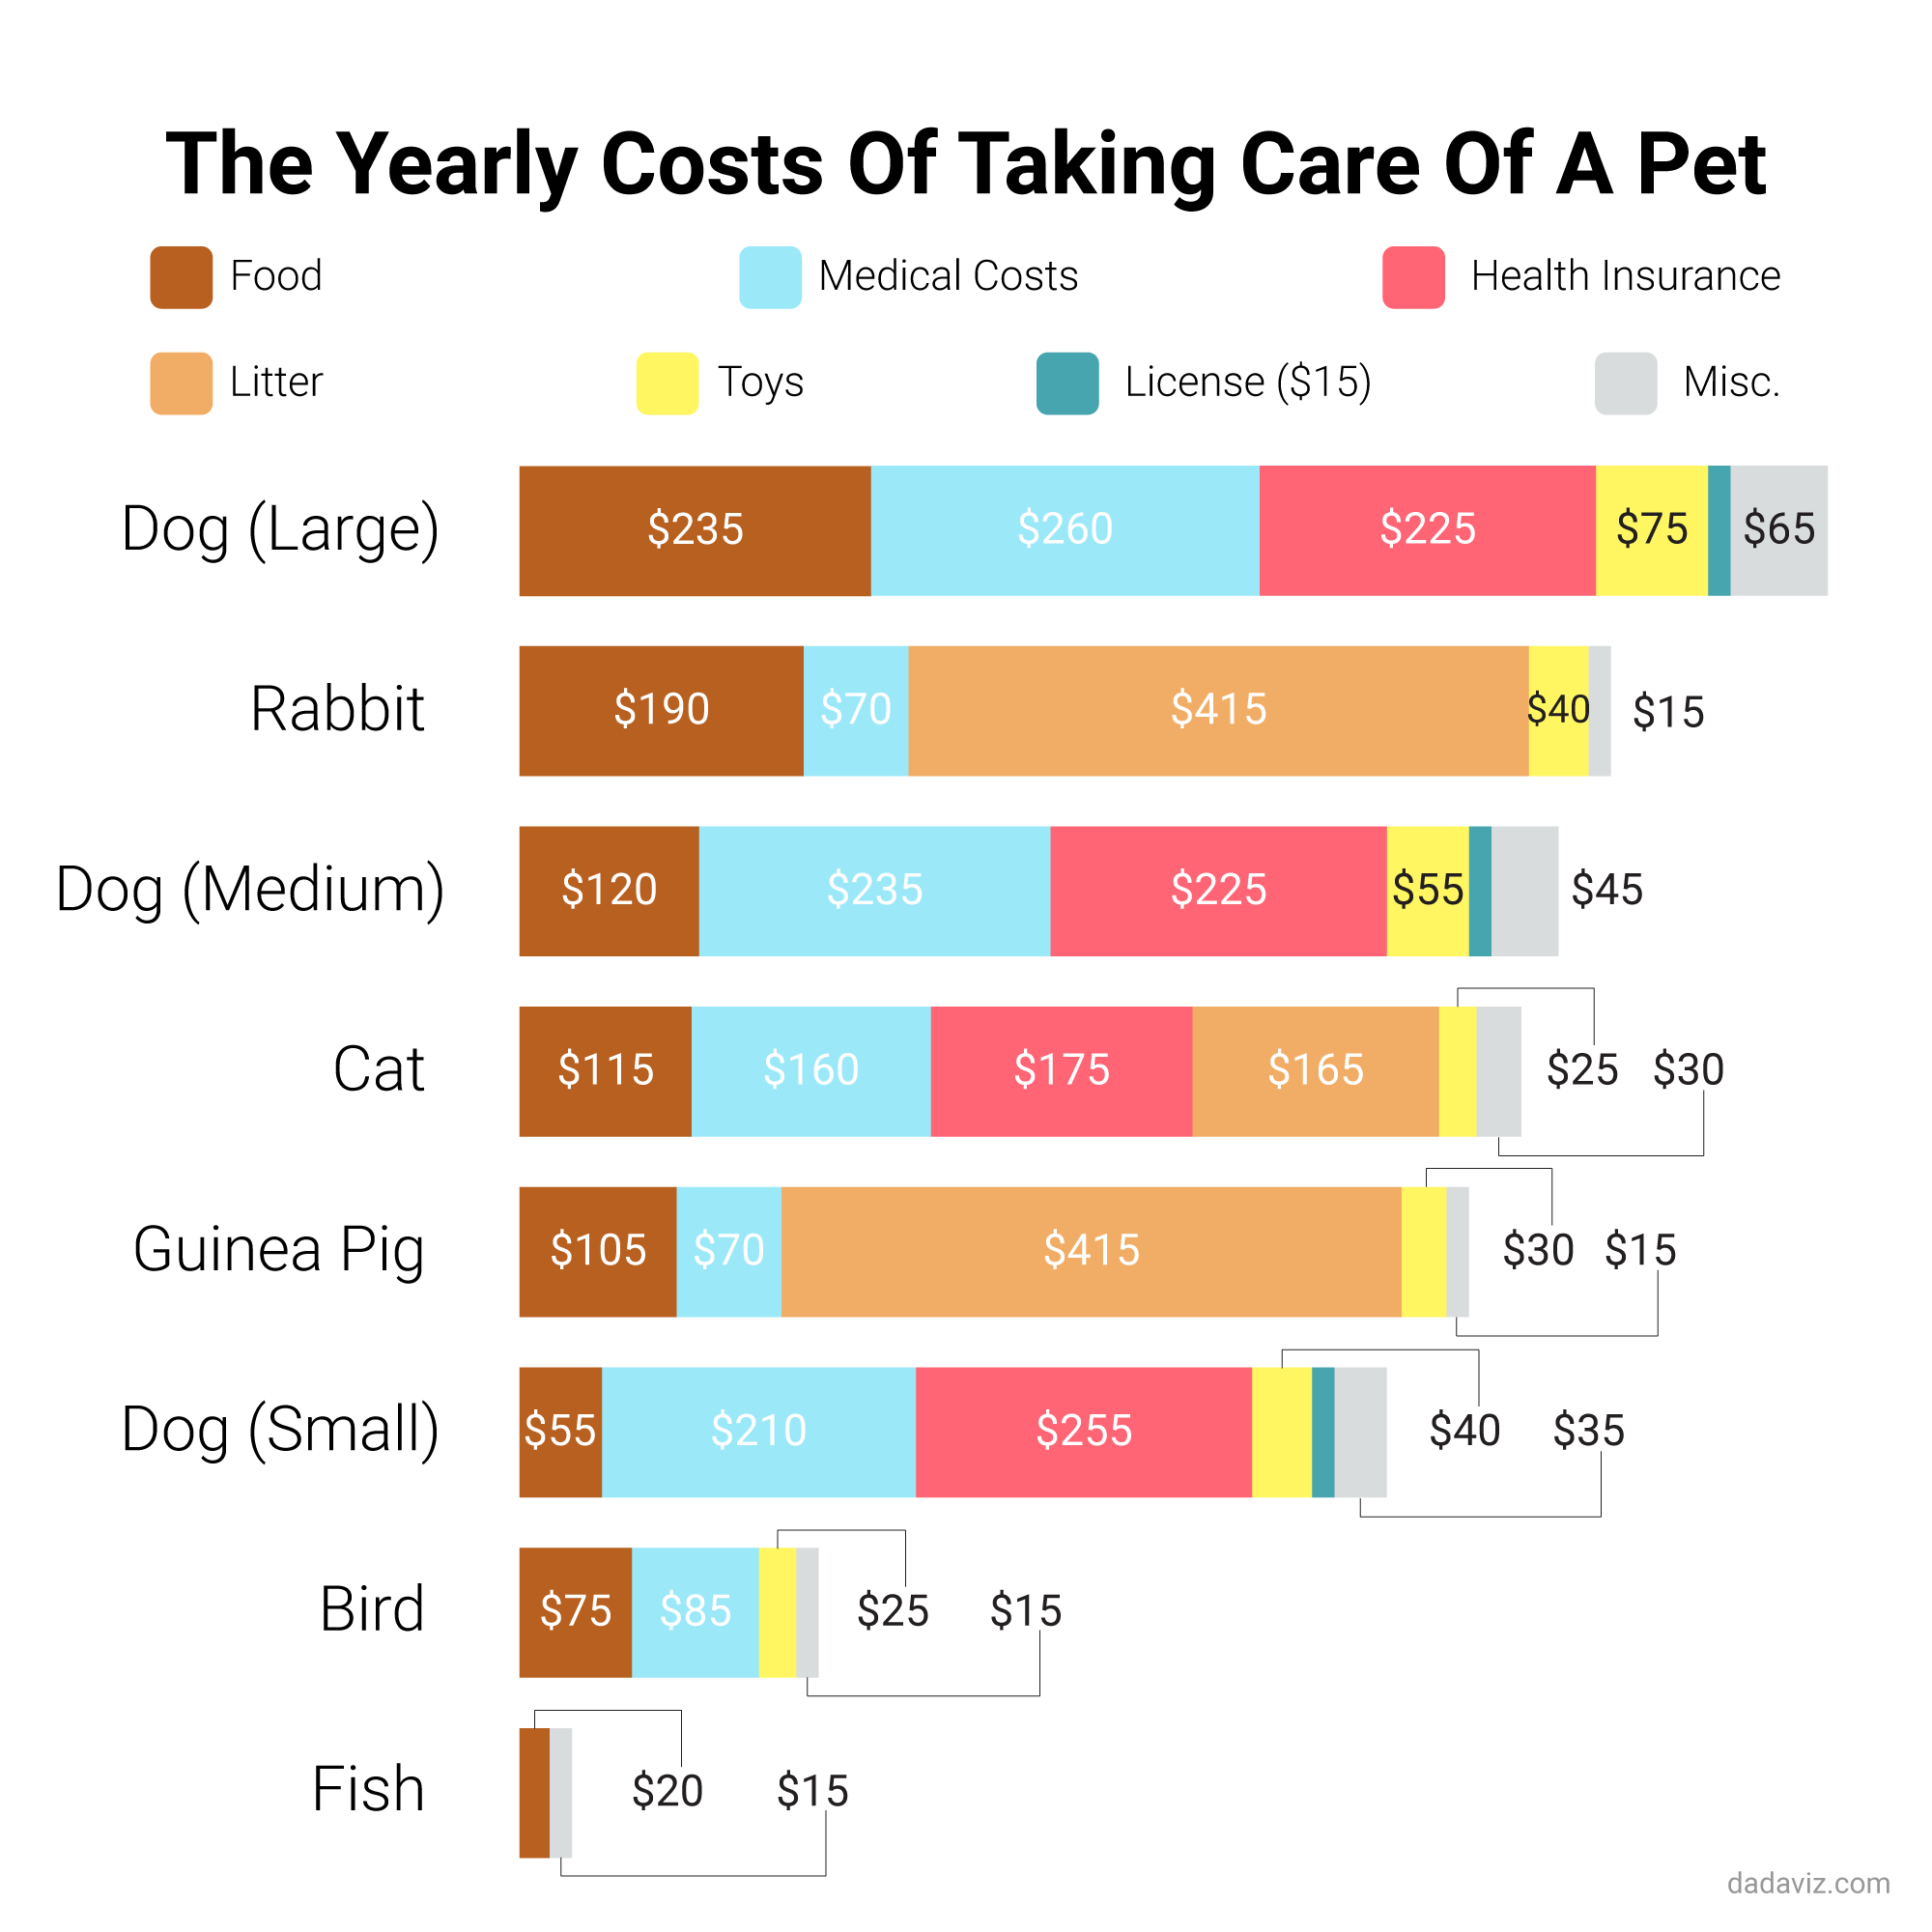 Which Household Pets Are Most Expensive?